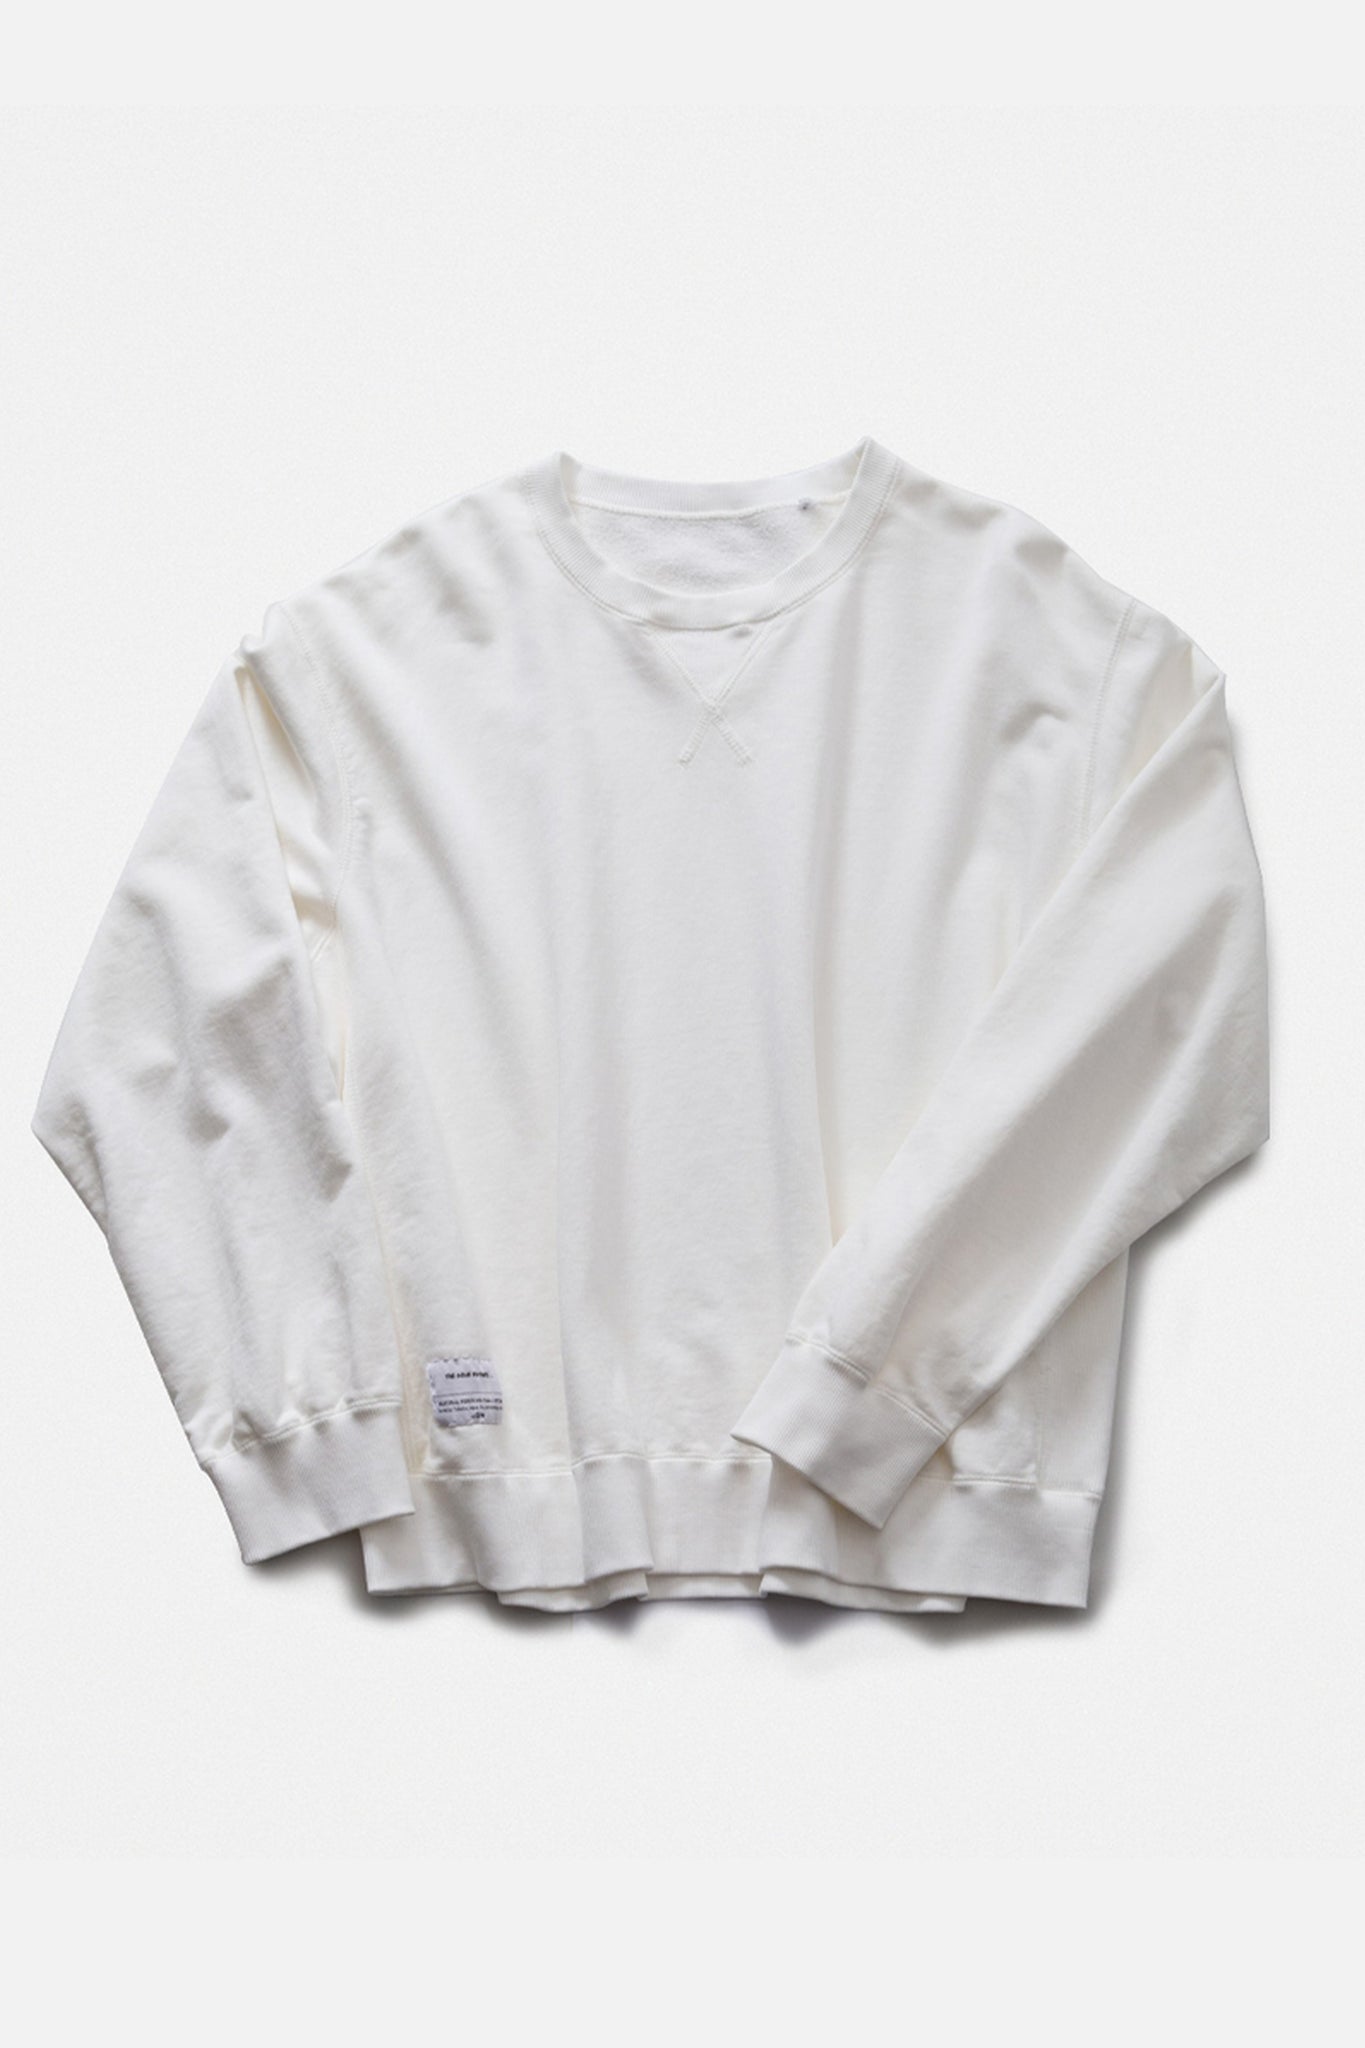 THE INOUE BROTHERS... "FRENCH TERRY SWEAT SHIRT / WHITE"